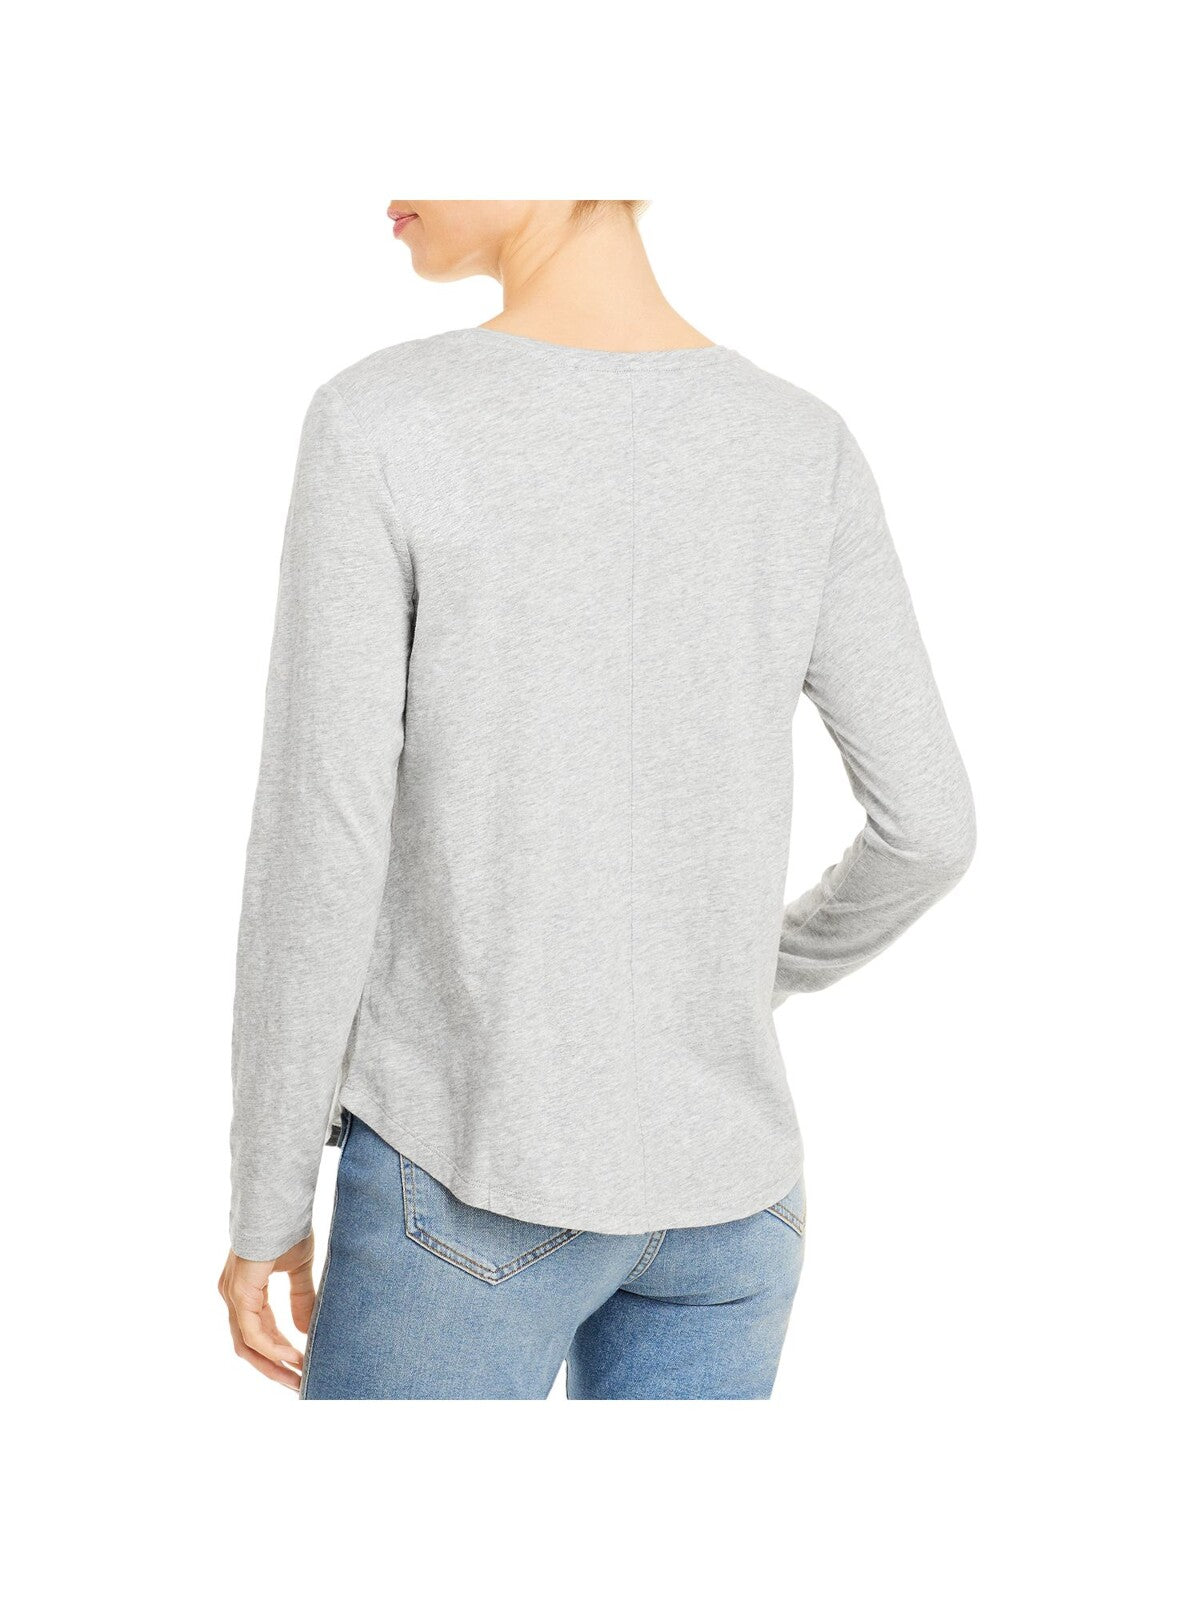 EILEEN FISHER Womens White Heather Long Sleeve Crew Neck Top L